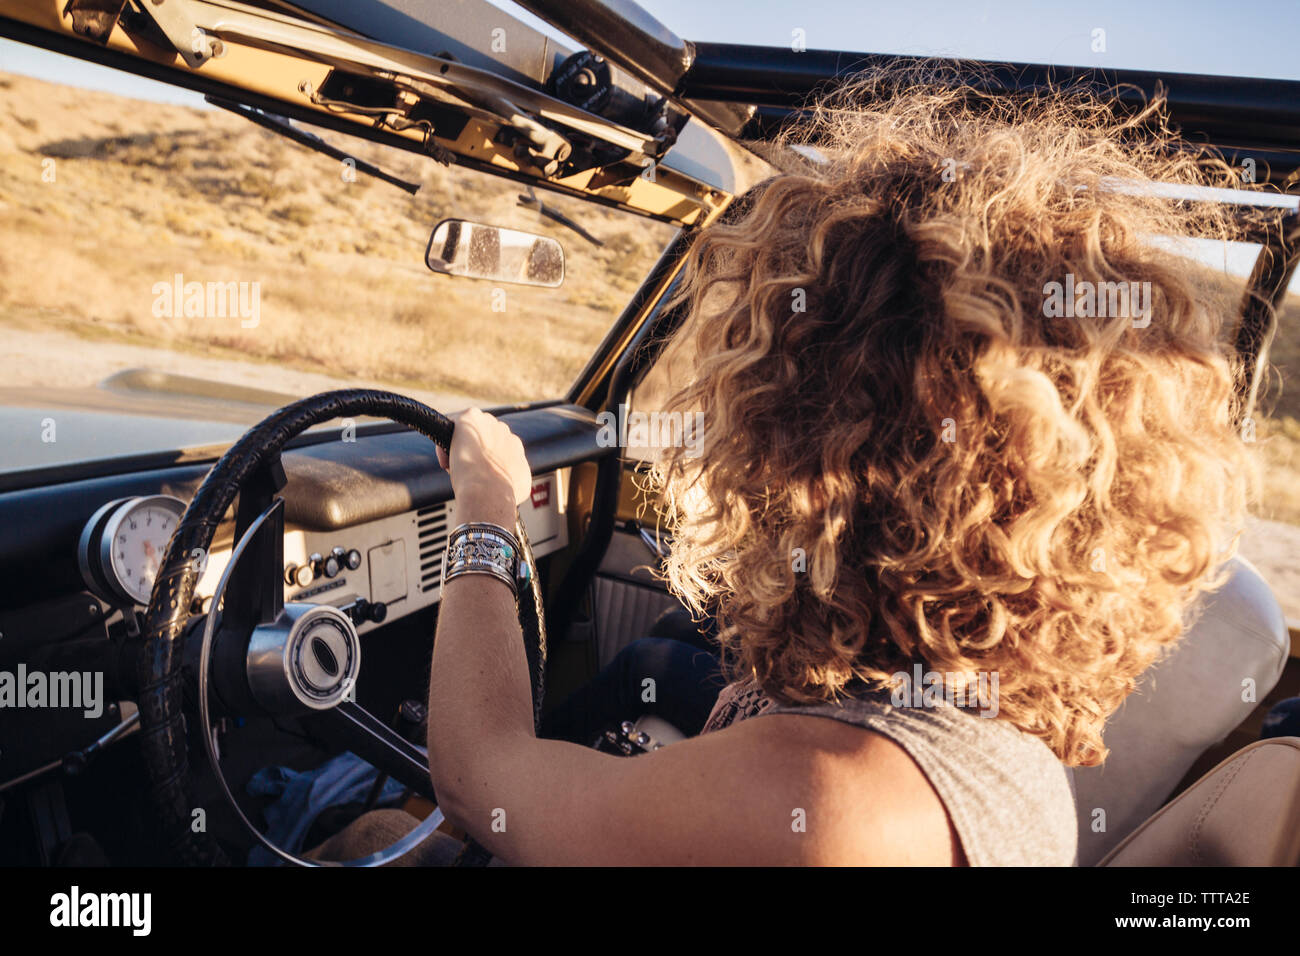 Side view of woman with curly hair driving off-road vehicle Stock Photo